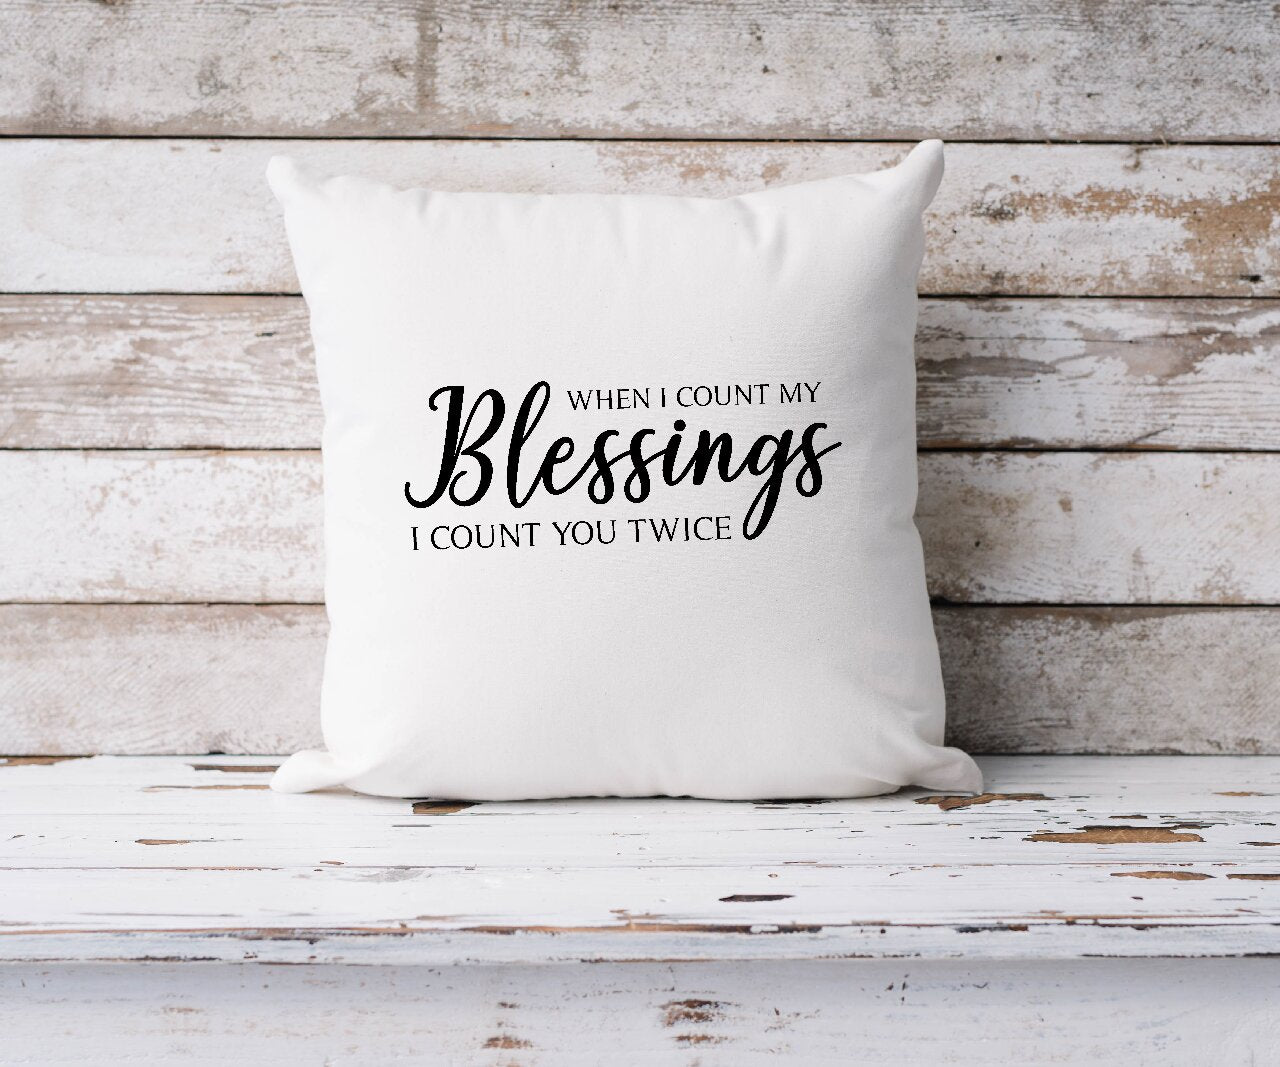 When I Count my Blessings I Count You Twice - Cushion Cover